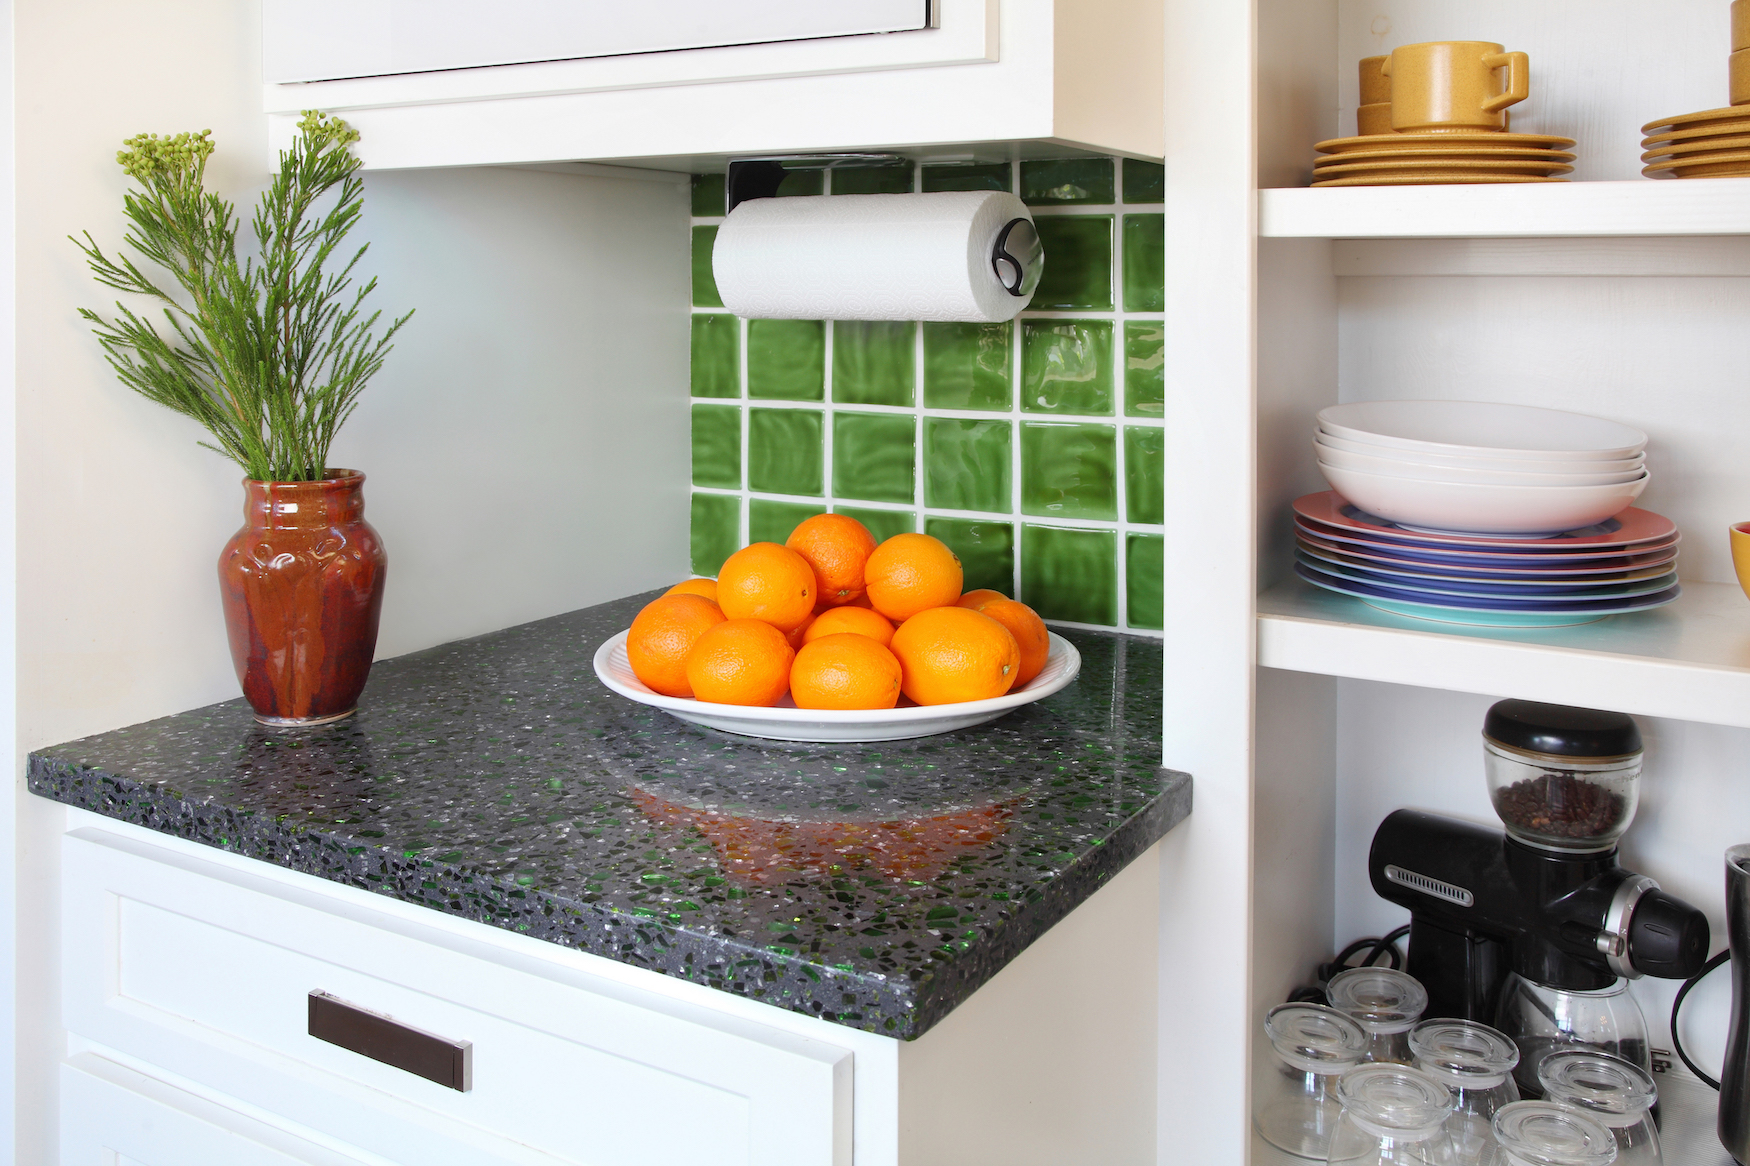 A small kitchen counter with a bowl of oranges next to an open shelving unit with mugs, plates, and appliances.